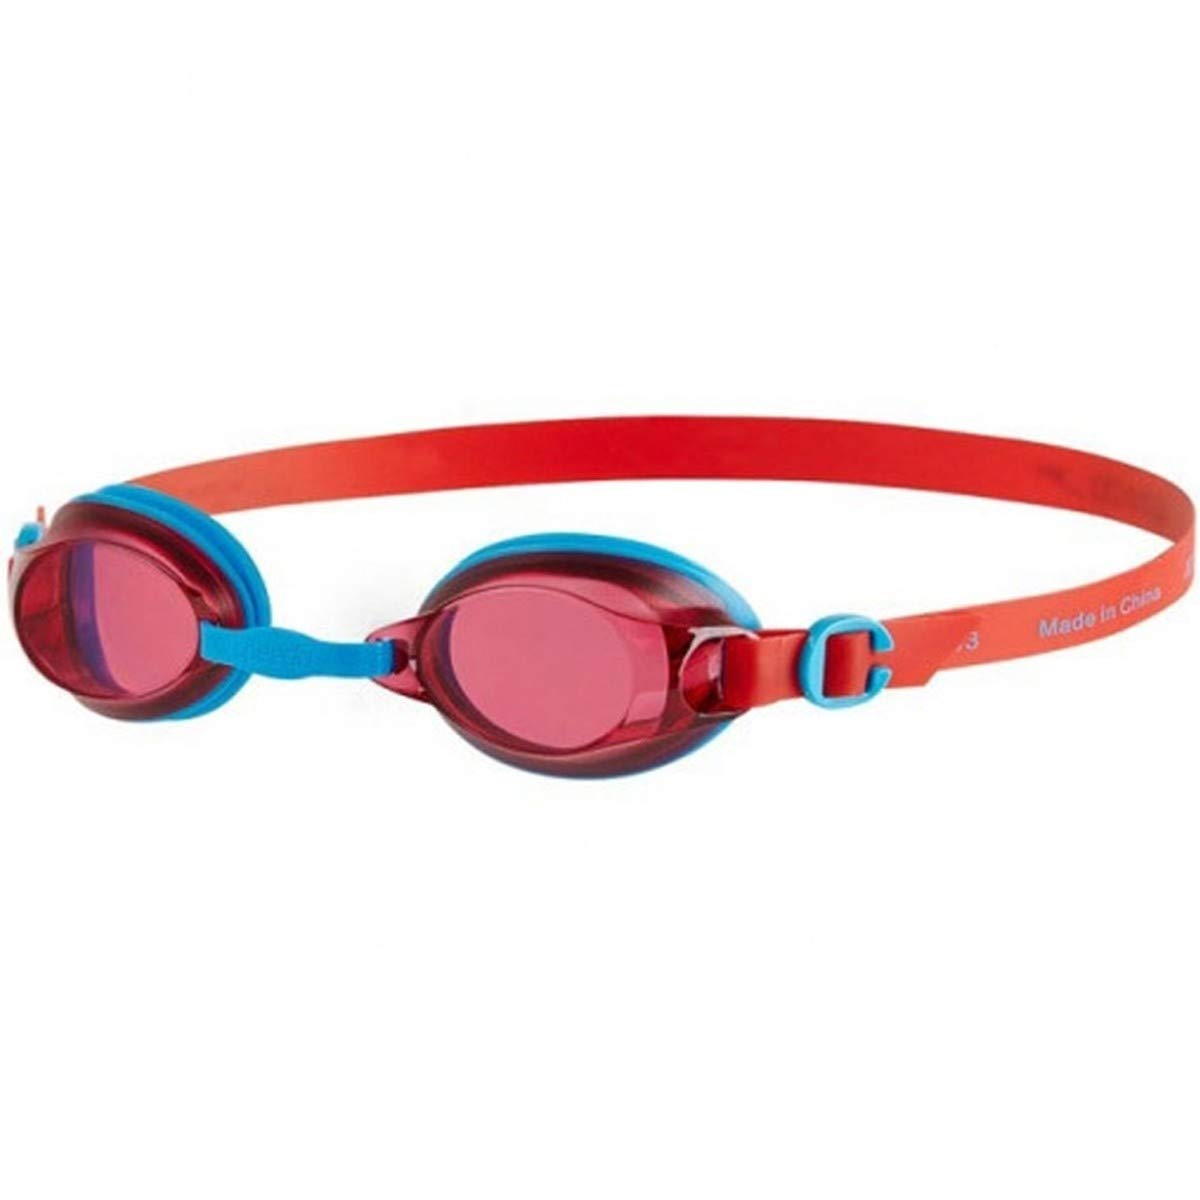 Speedo Jet V2 Junior Swimming Goggles for age 6 to 14 Years - Blue/Red - Best Price online Prokicksports.com